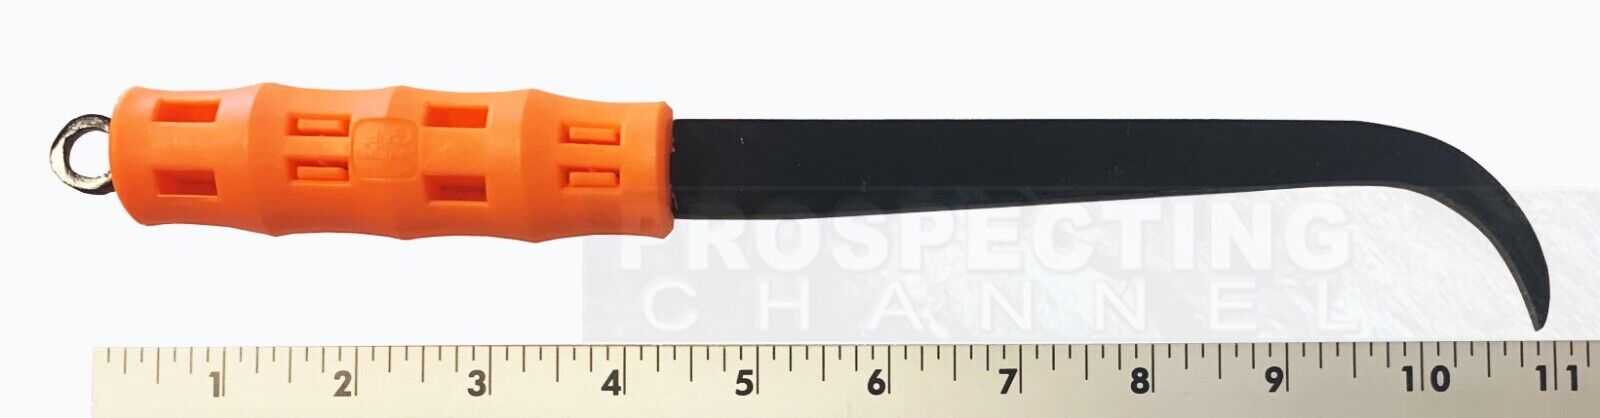 SNAPPY GRIP HANDLE Hooked Crevice GOLD Digging Crevicing Sniping Tool 11\